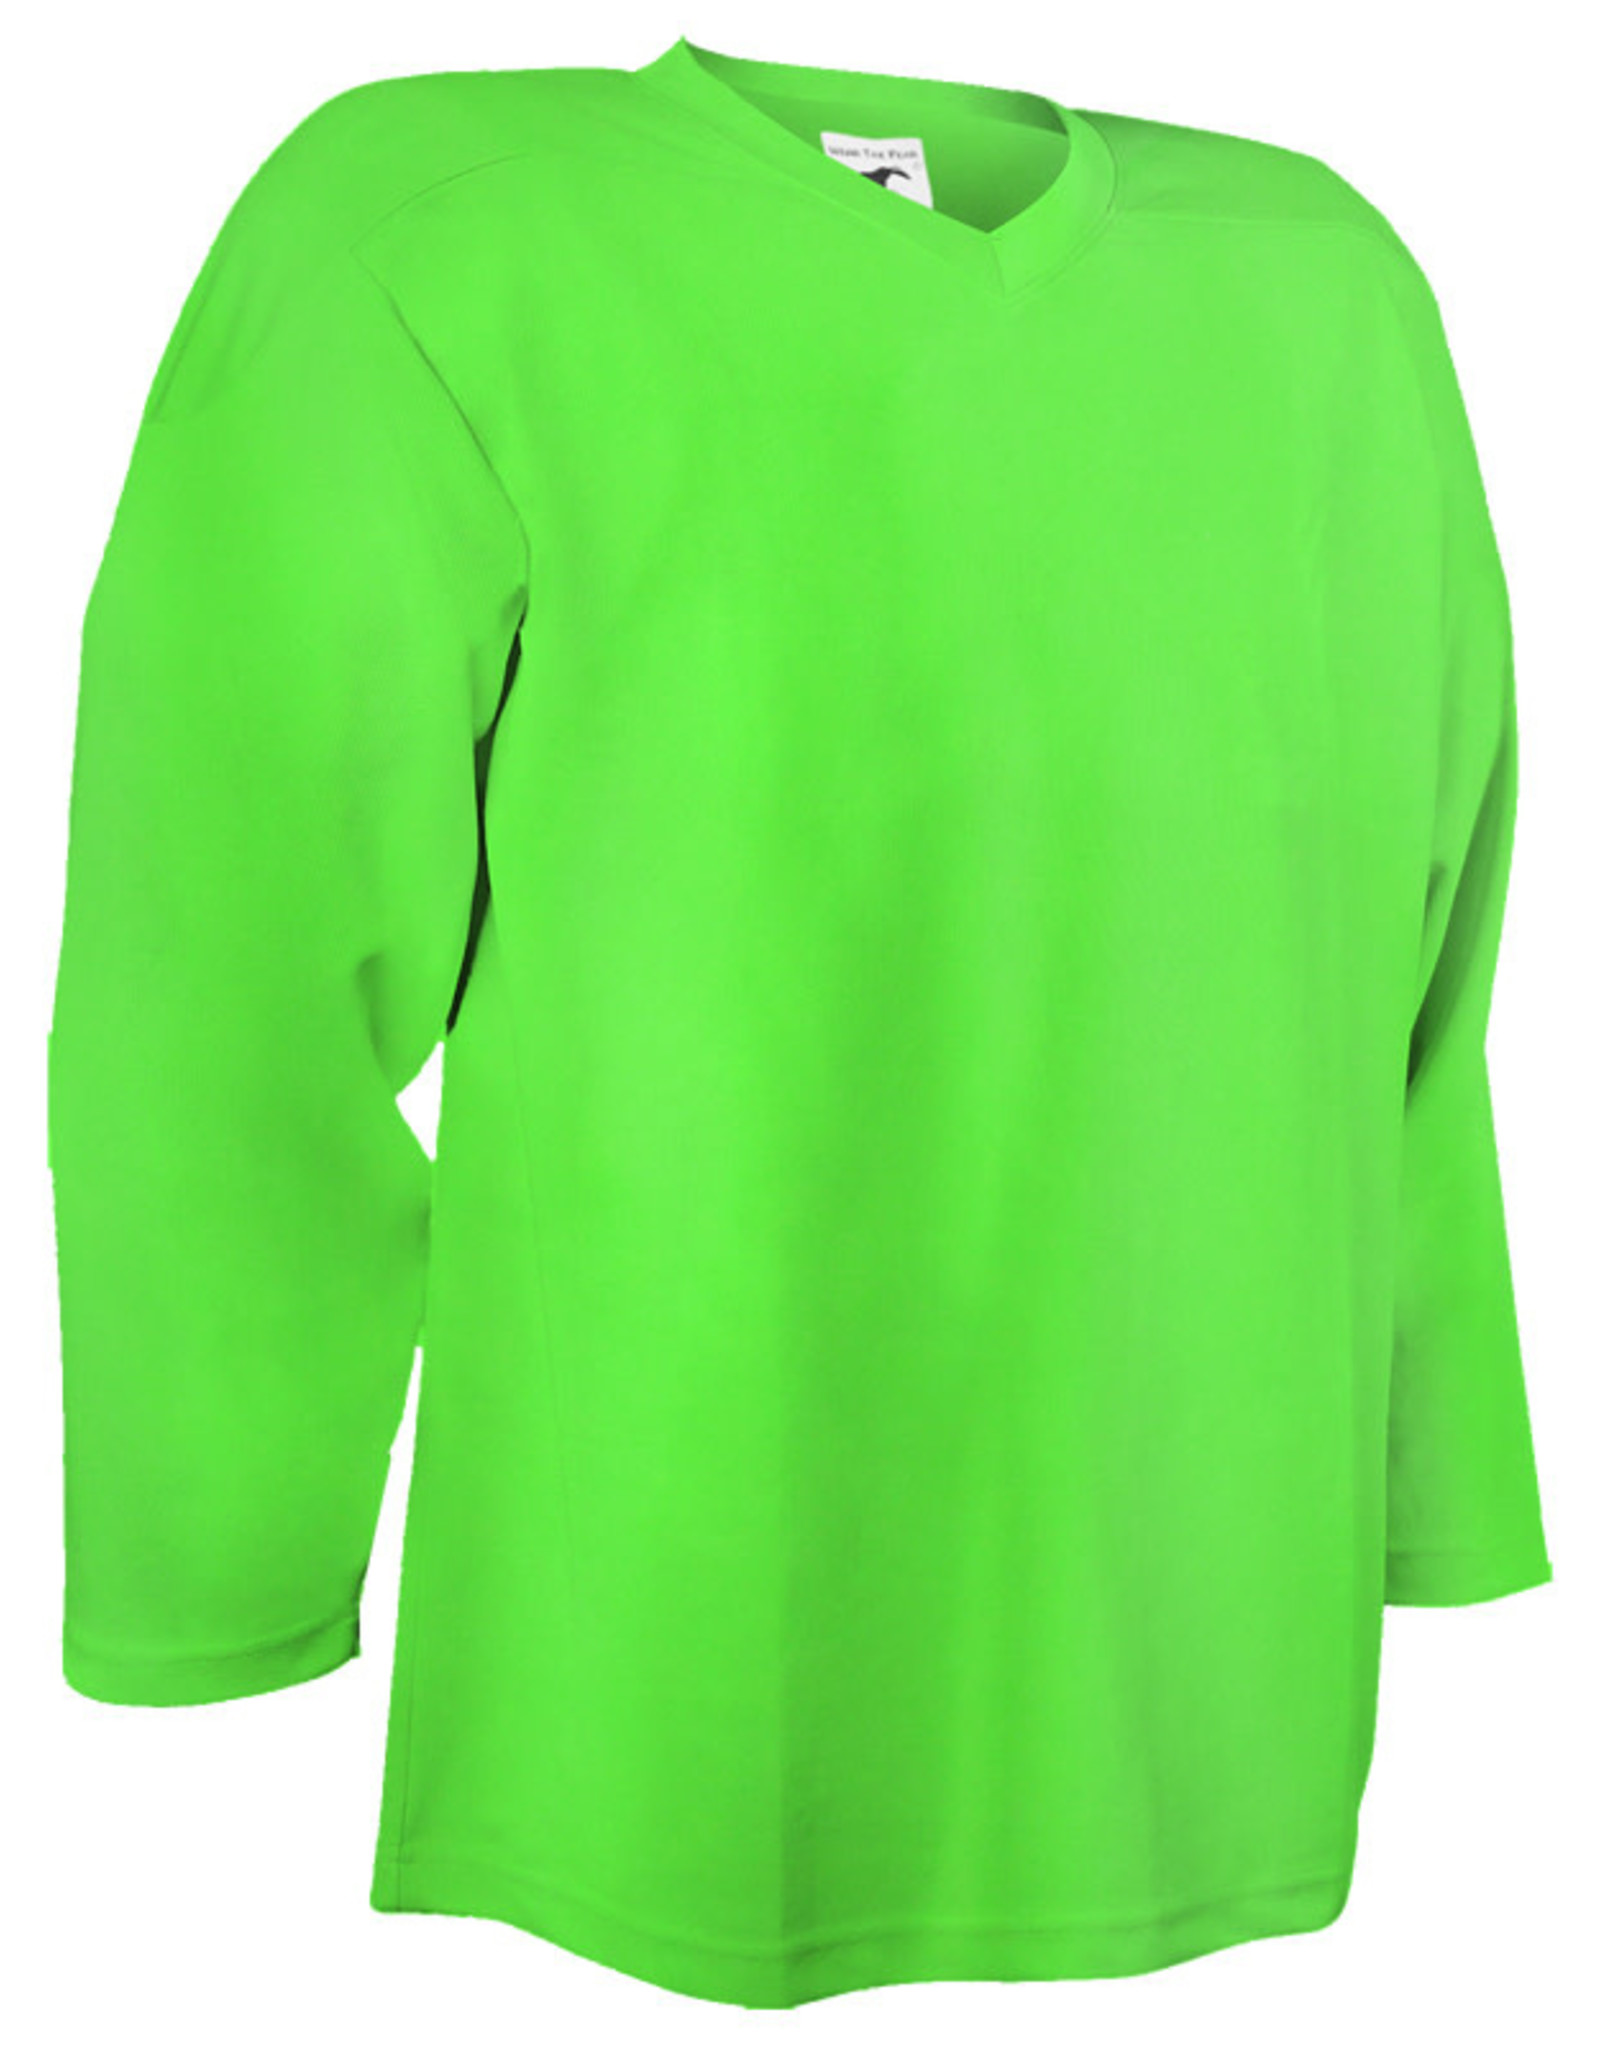 Pear Sox Air Mesh Practice Jersey (YOUTH NEON GREEN) - Total Game Plan  (TGP) Sports